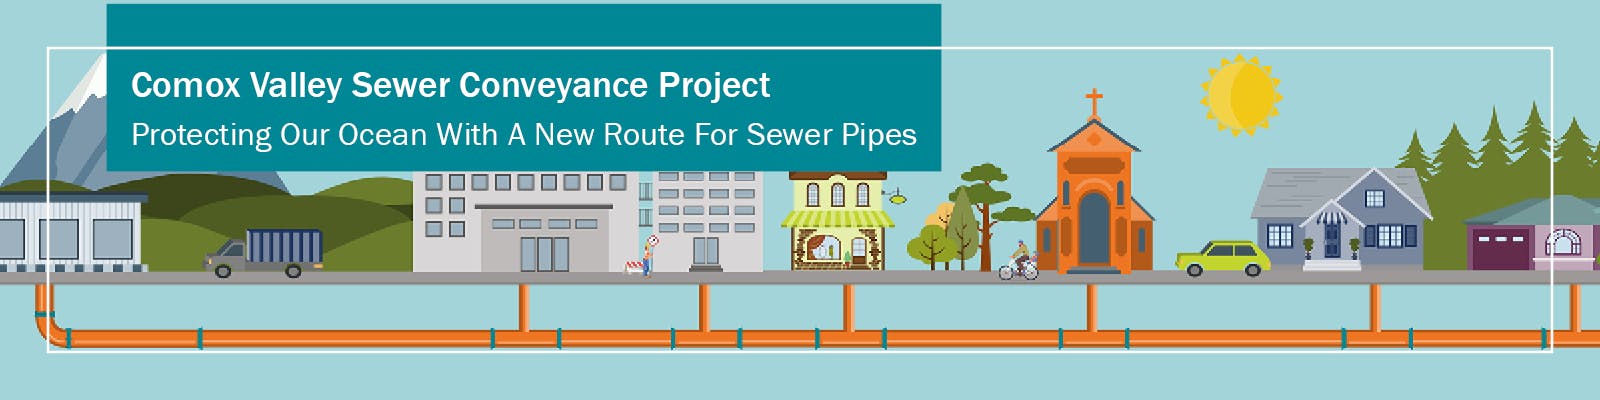 Sewer Conveyance Banner Image